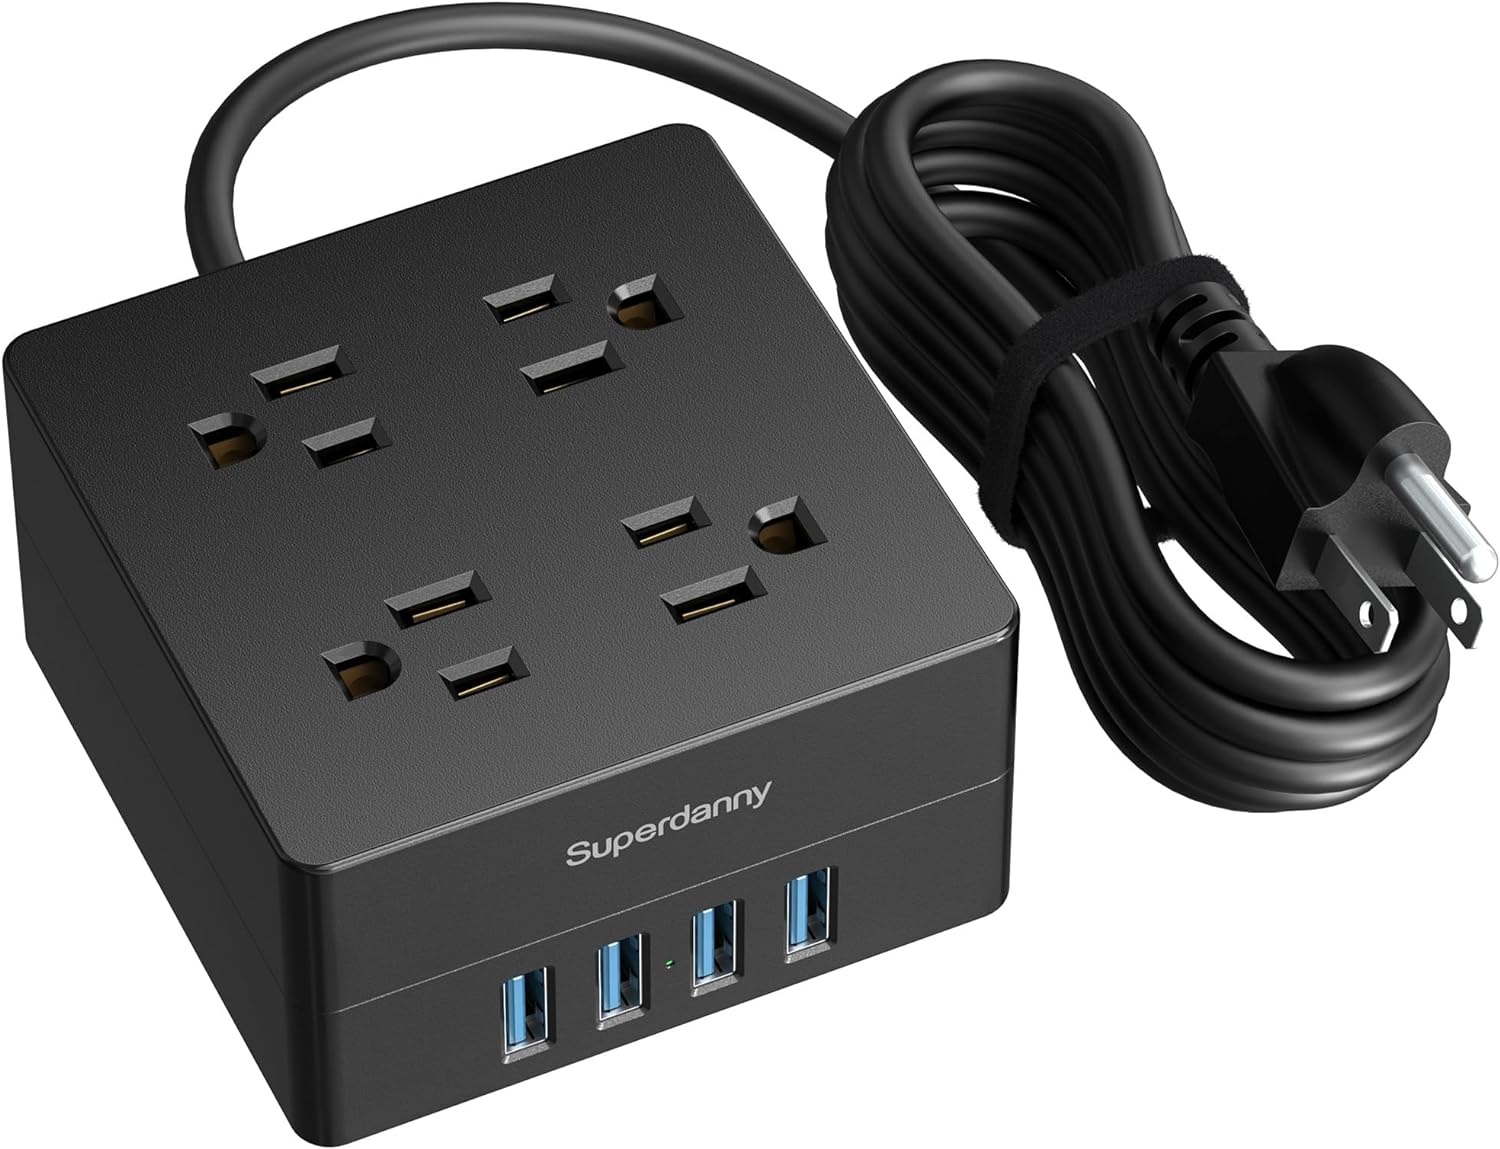 5ft Power Strip, SUPERDANNY Surge Protector 900 Joules, 4-Outlet 4-USB Extension Cord, Overload Switch, Grounded, Mountable, Desktop Charging Station for Home, Office, School, Dorm, Computer, Black